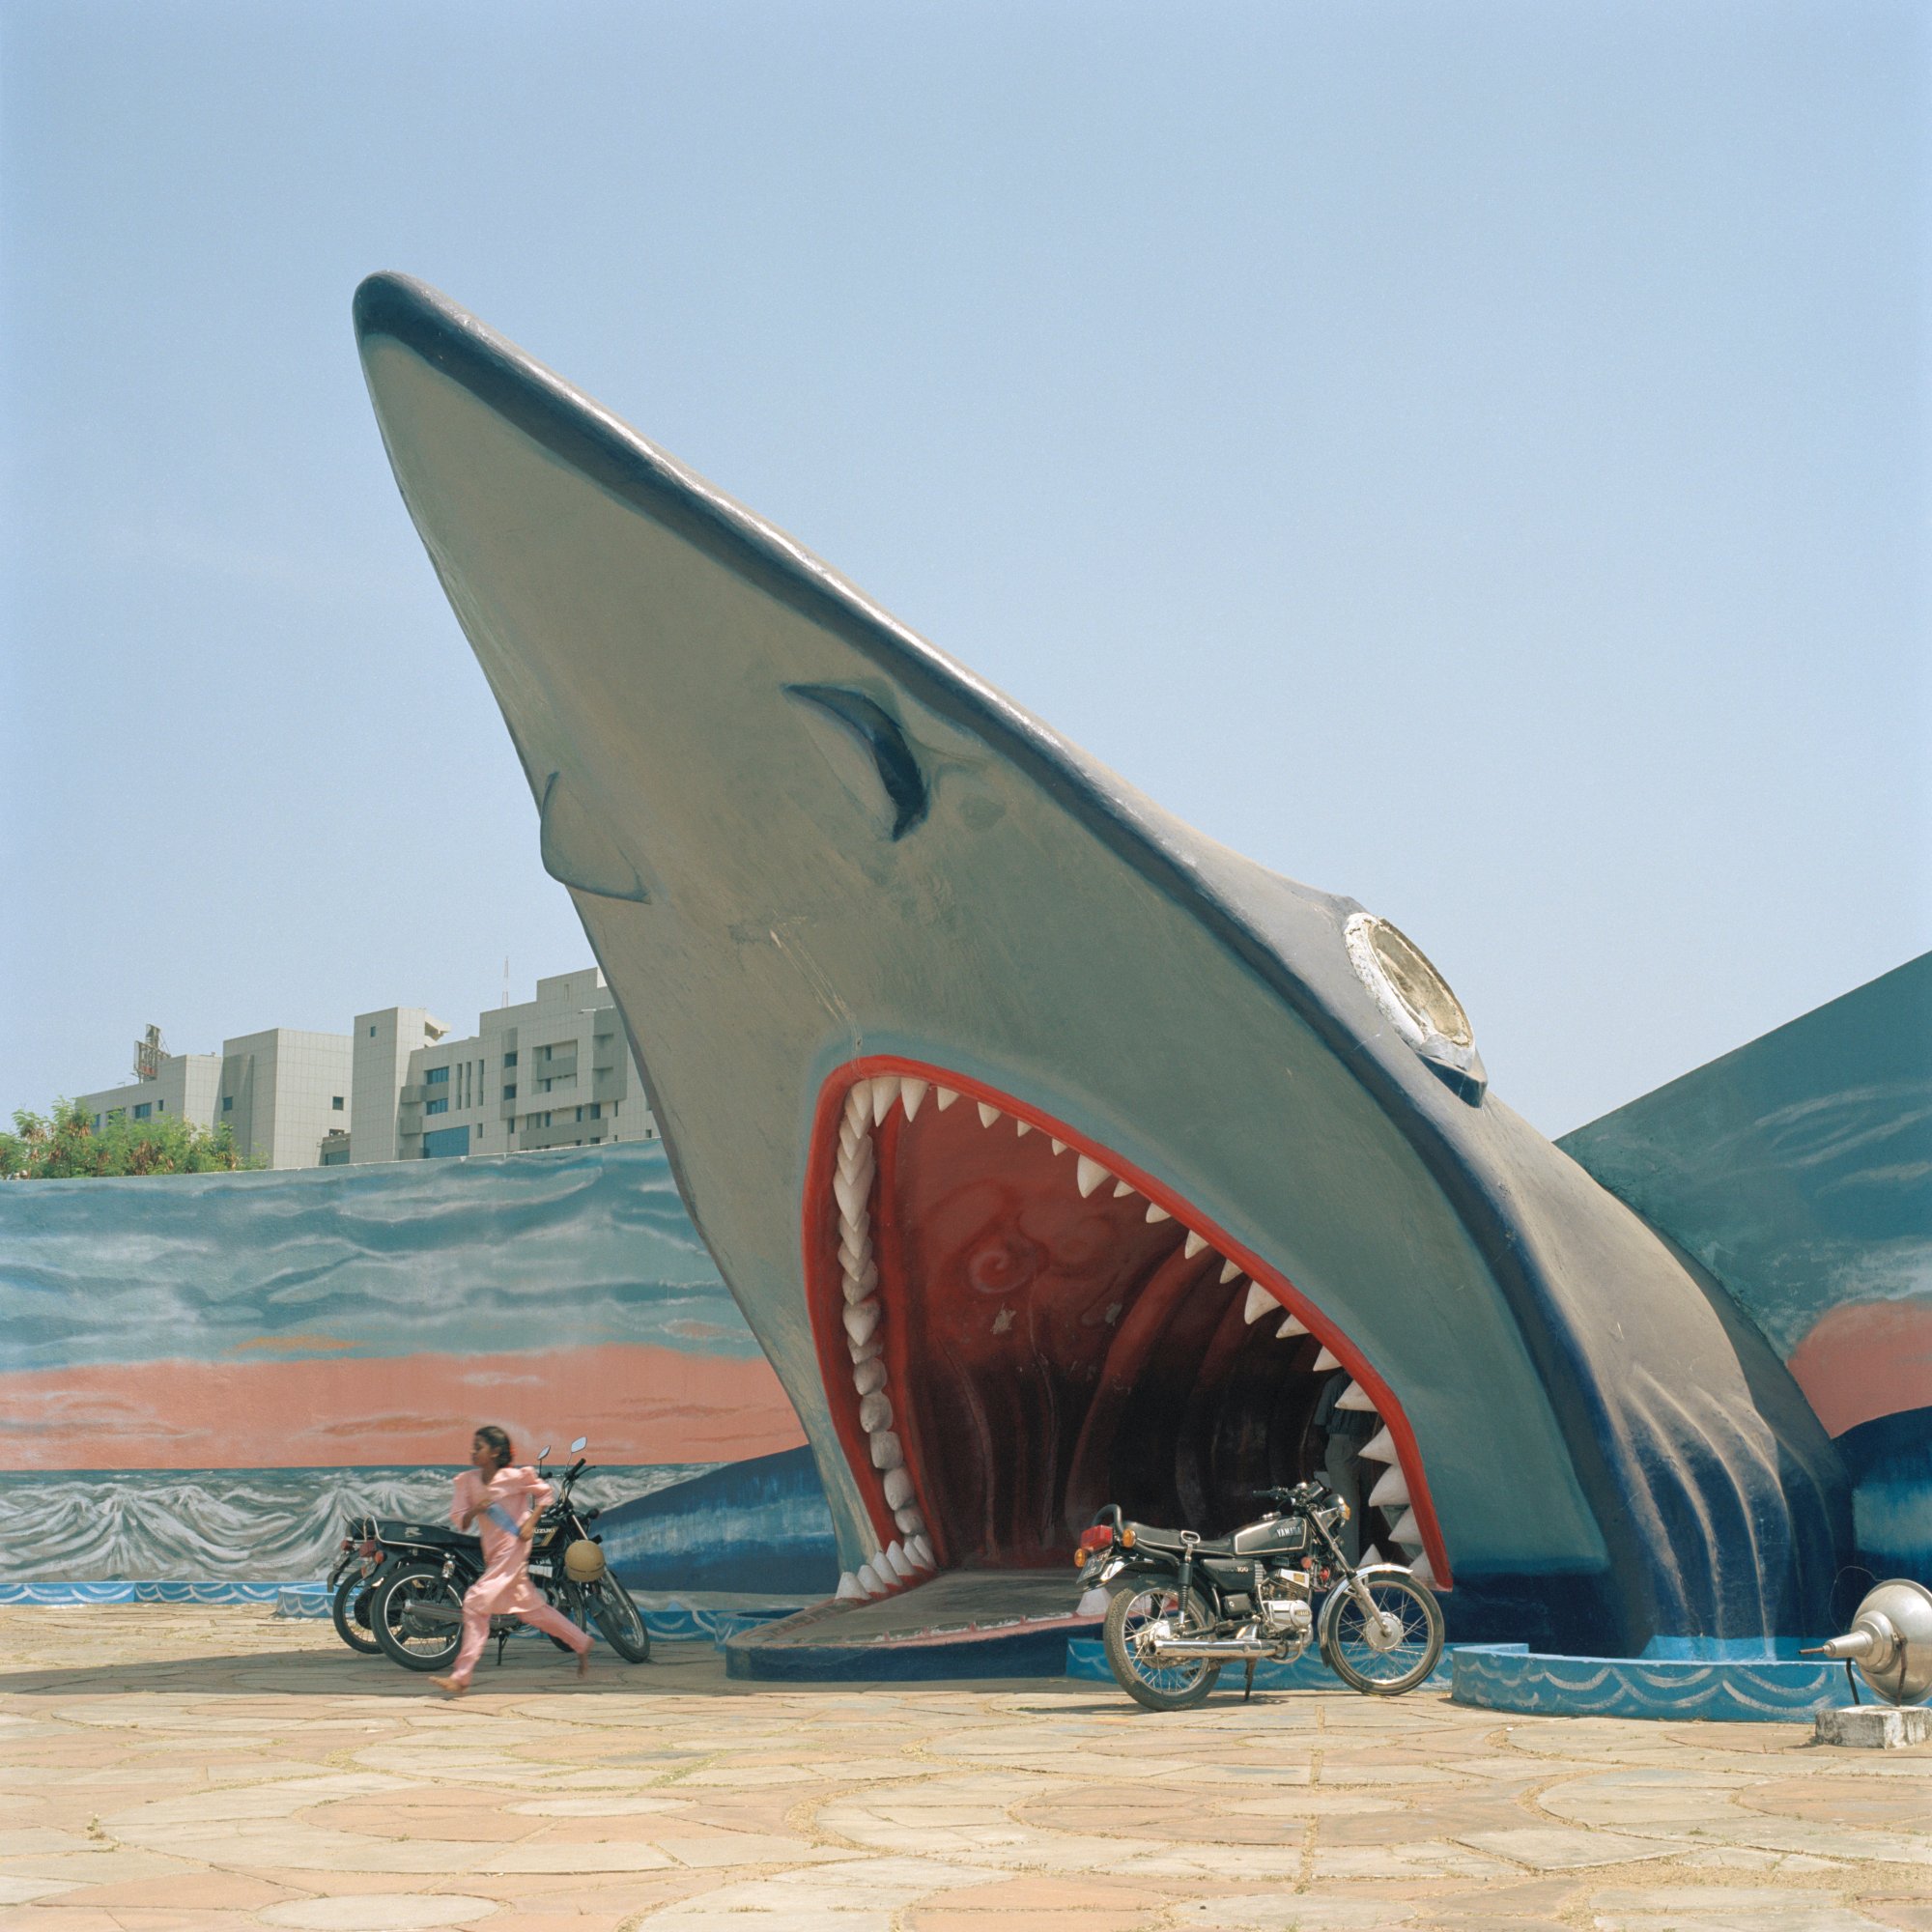 A person running between parked motorcycles, in the shadow of a giant sculpture of a shark's head emerging from the ground with its mouth open as a portal.